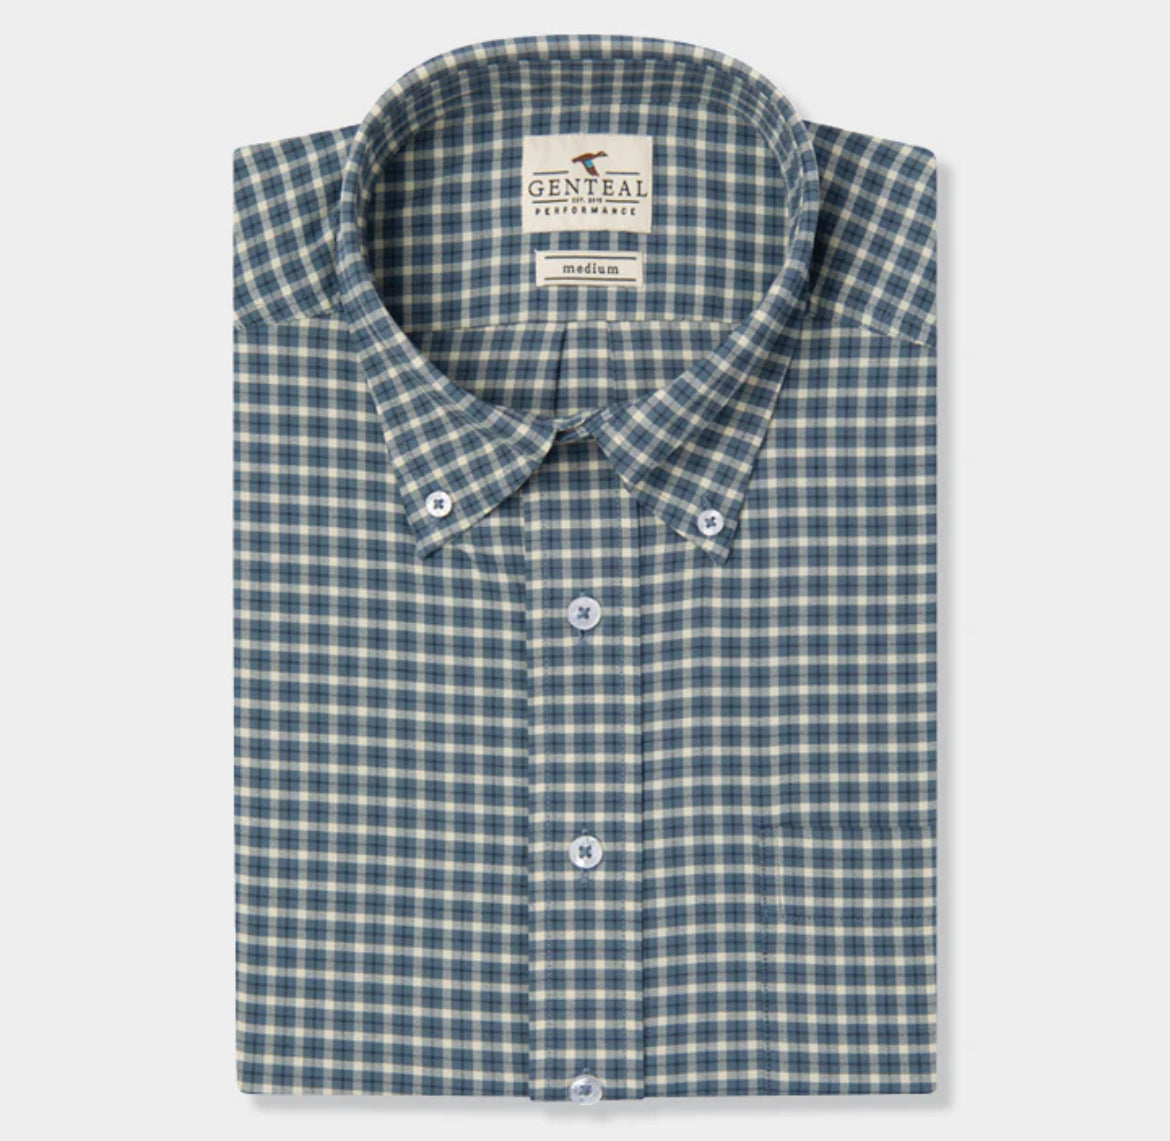 Sand Valley Plaid SofTouch Performance Woven